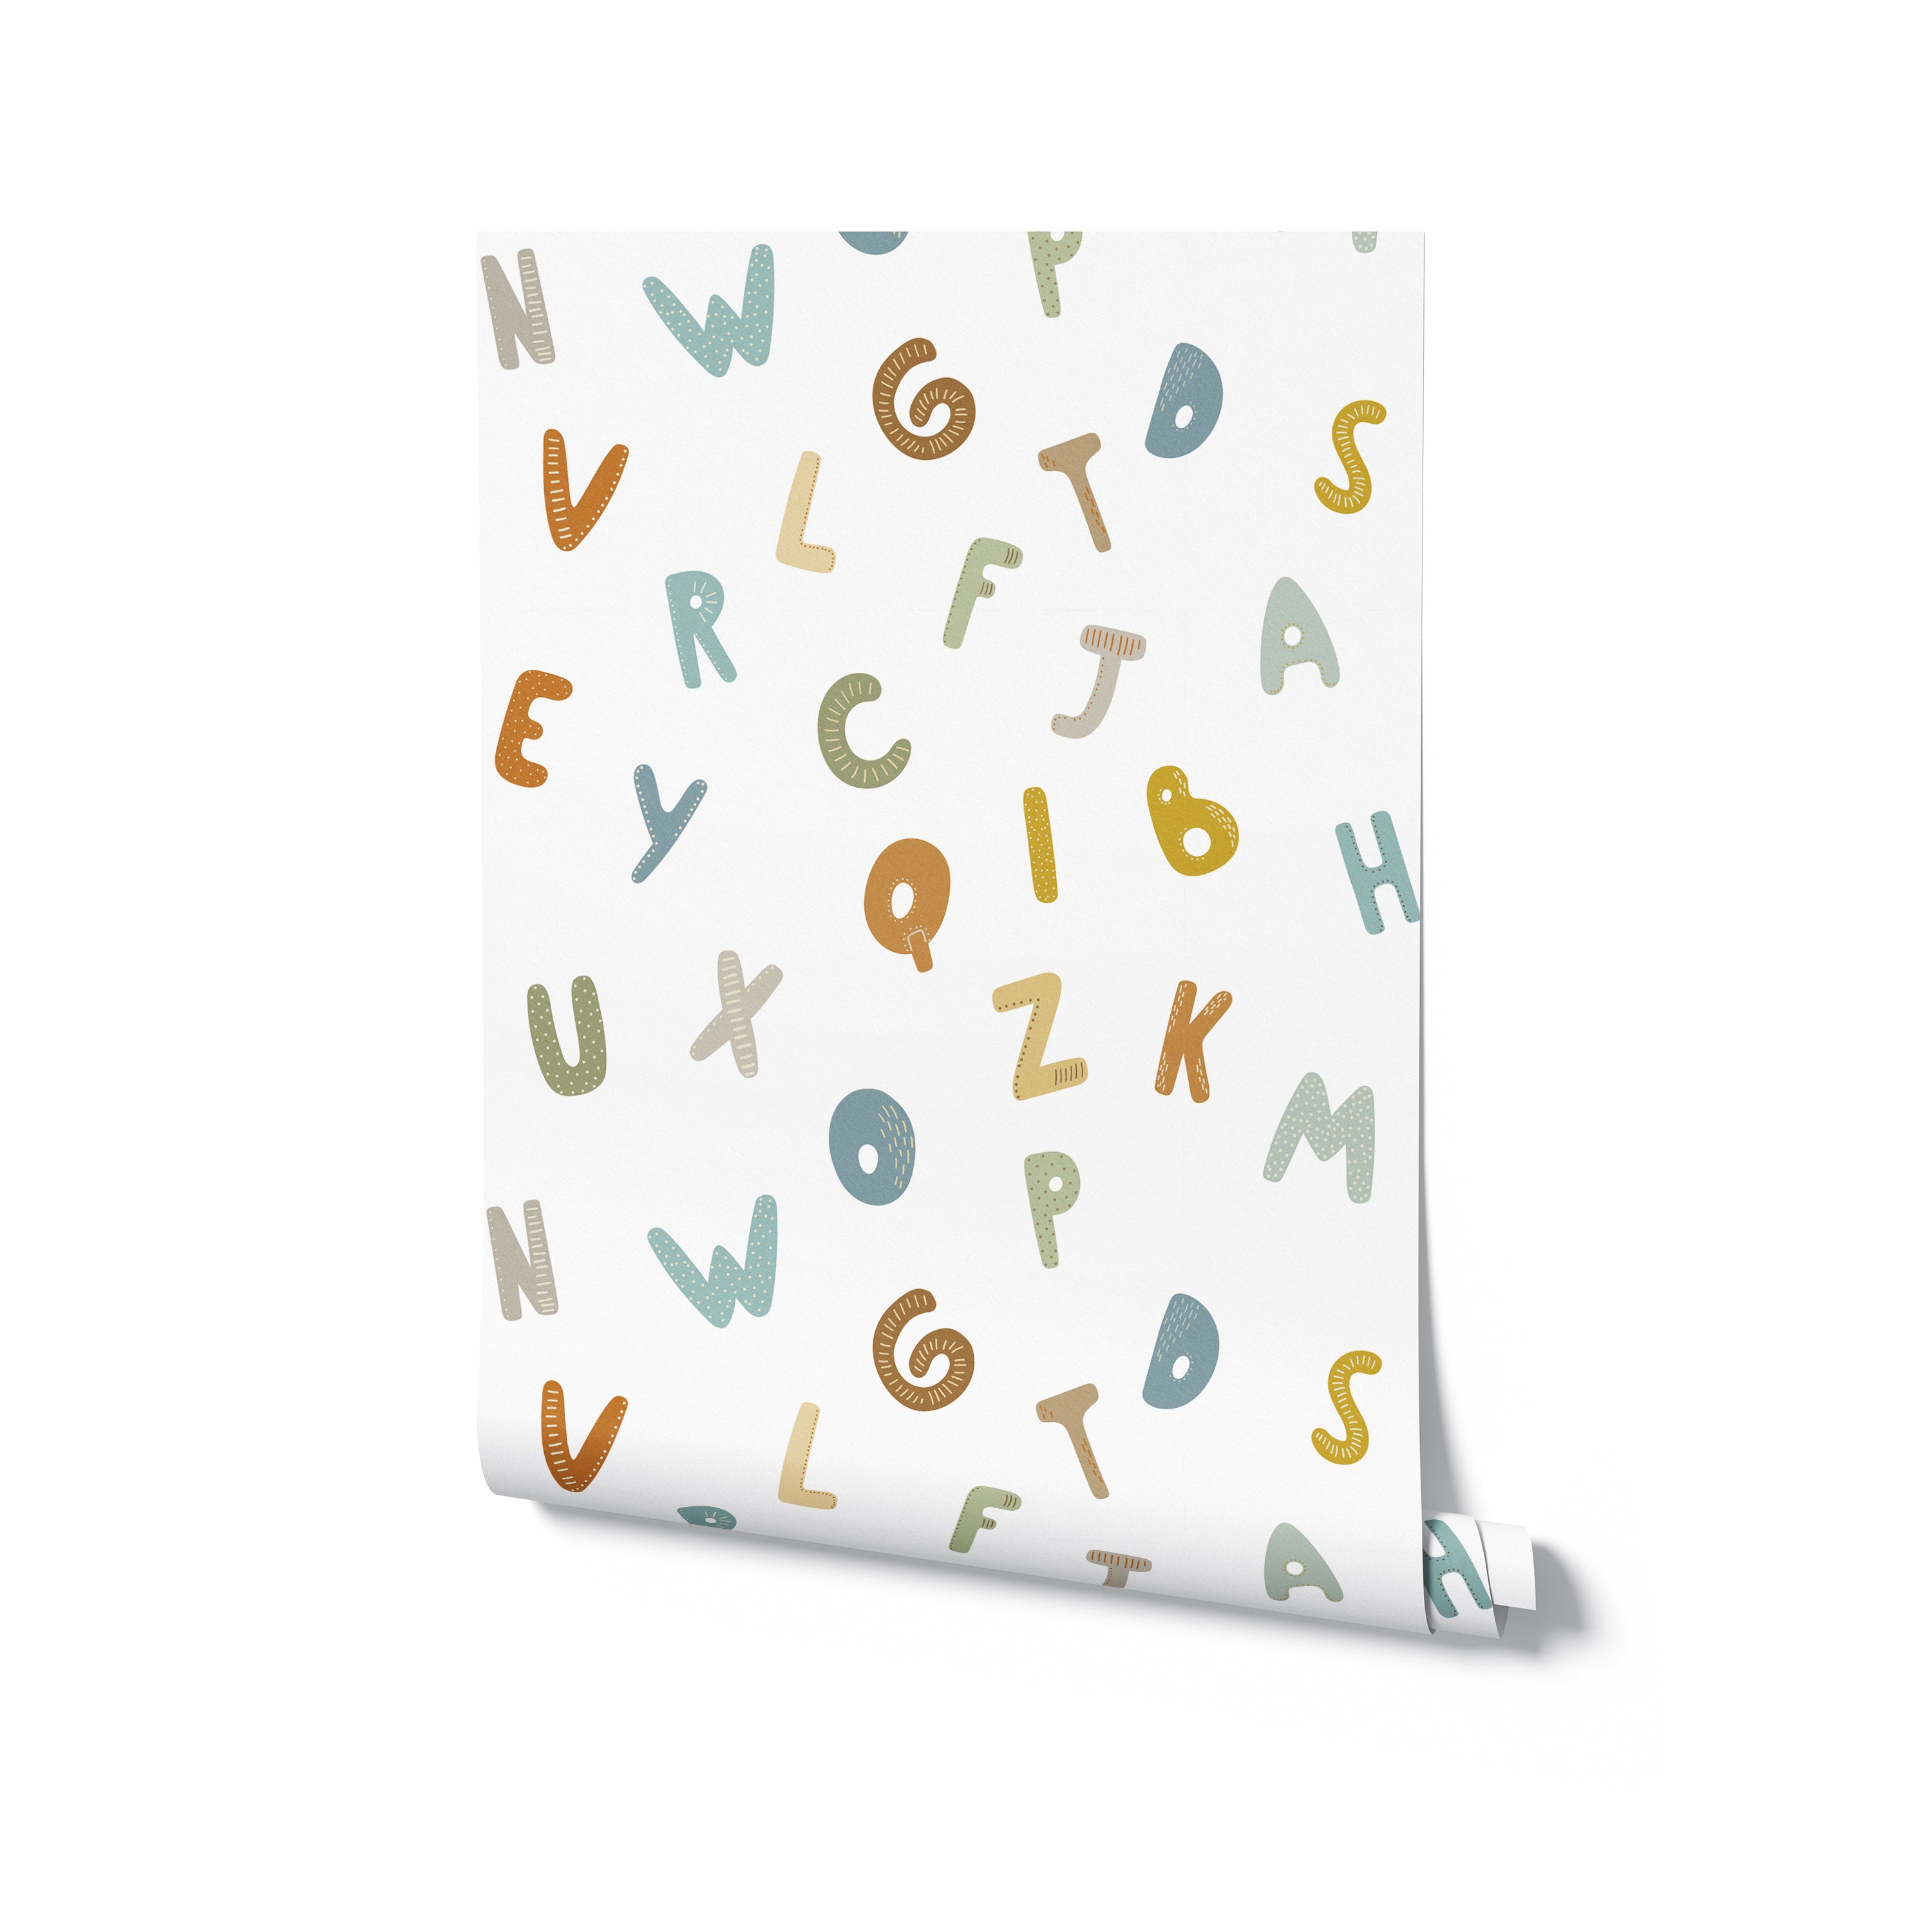 A roll of 'Nursery Alphabet Wallpaper', partially unrolled to reveal the cheerful alphabet design. The wallpaper features a diverse mix of letters in pastel colors with distinctive textures and patterns, making it a perfect educational and decorative addition to a young child's room.